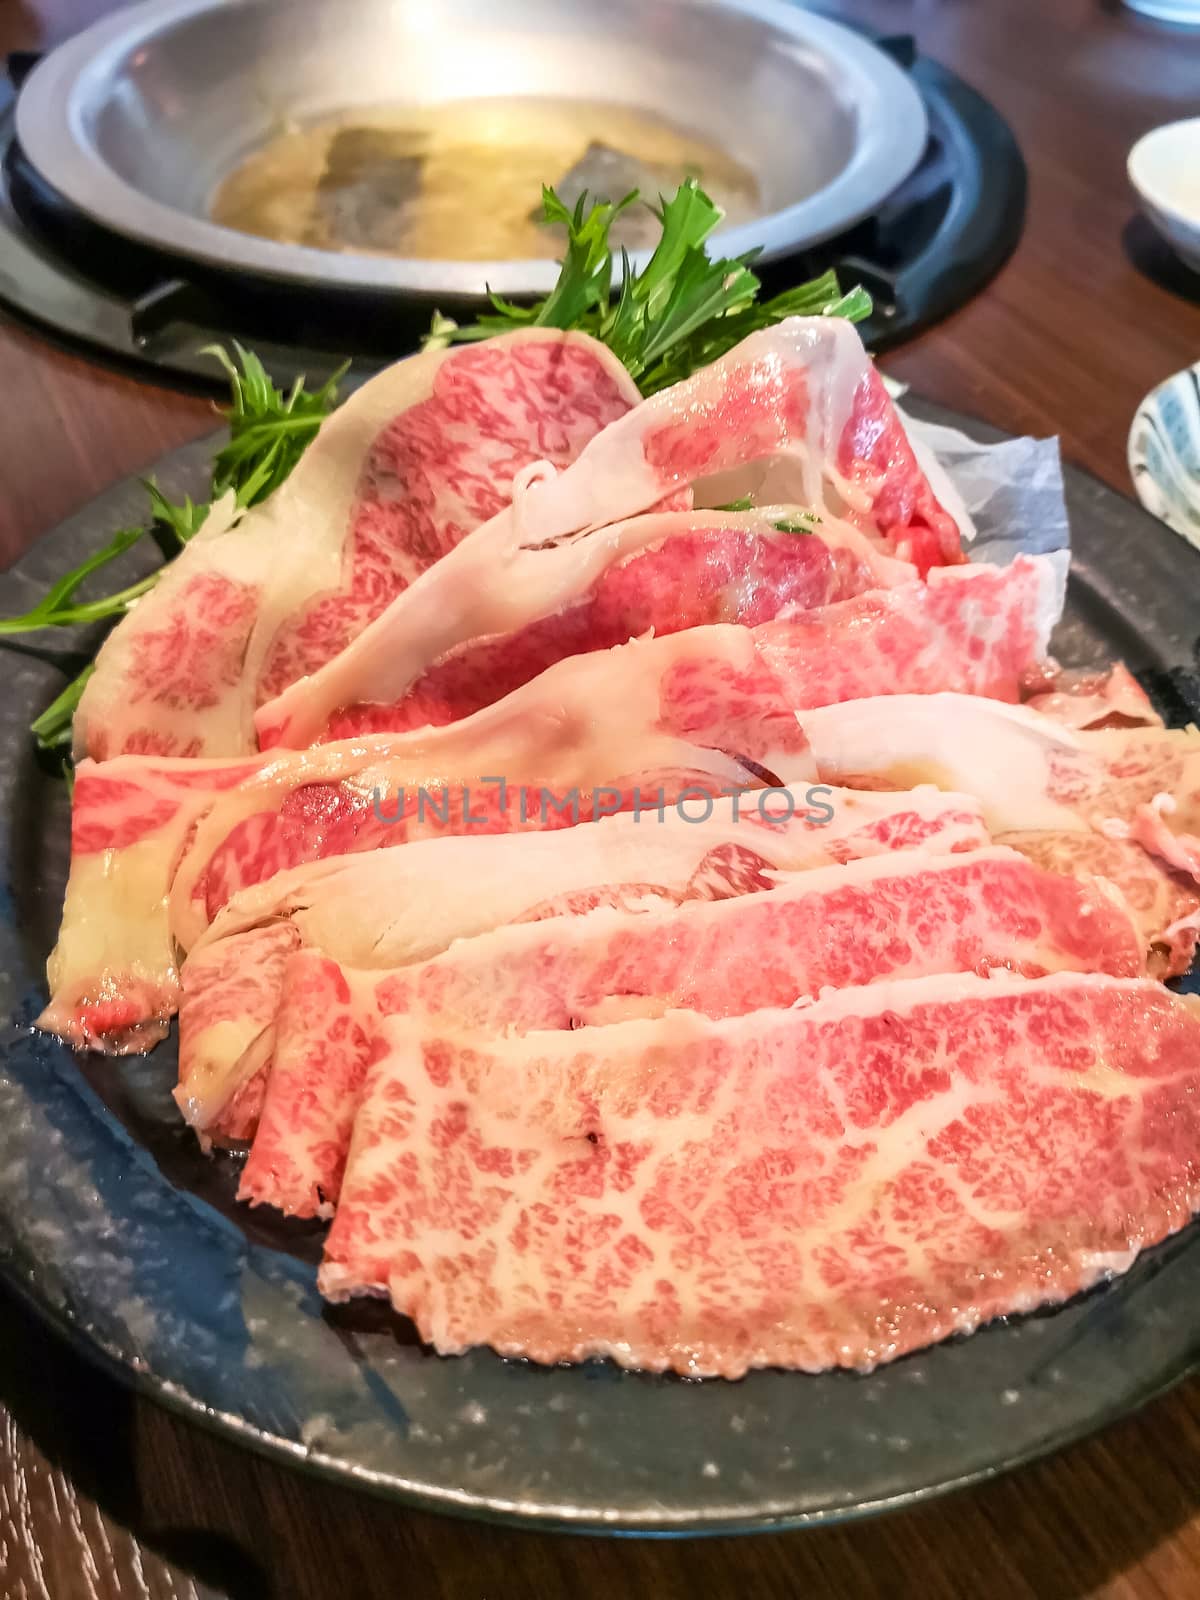 Okinawa style local beef dish in Naha by f11photo